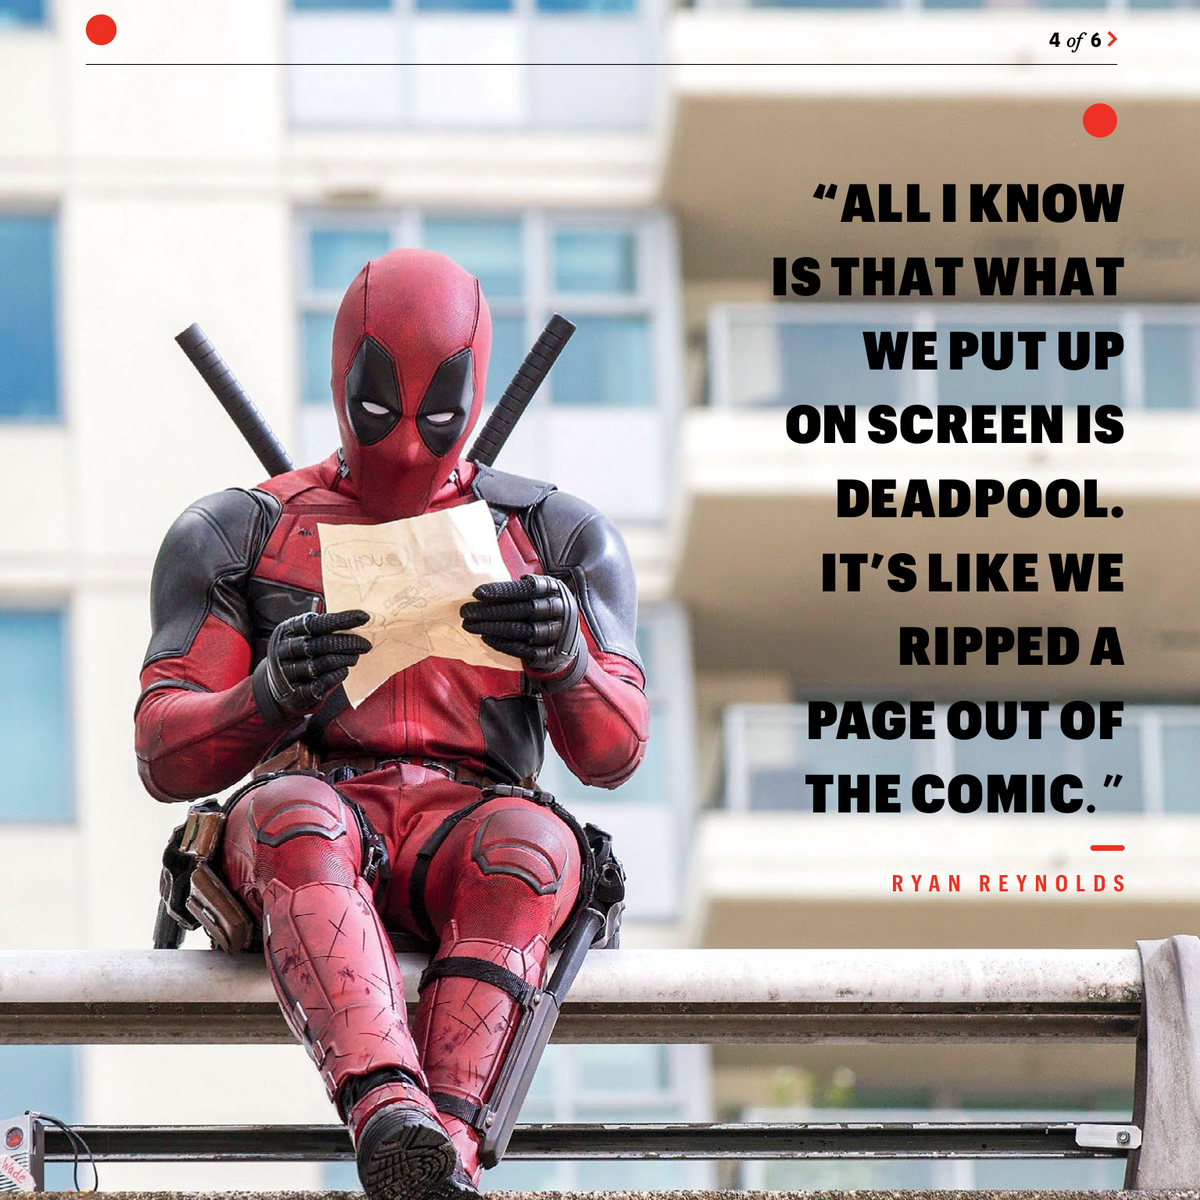 Deadpool 2 Five Reasons Why We Can't Wait to see it - The HotCorn